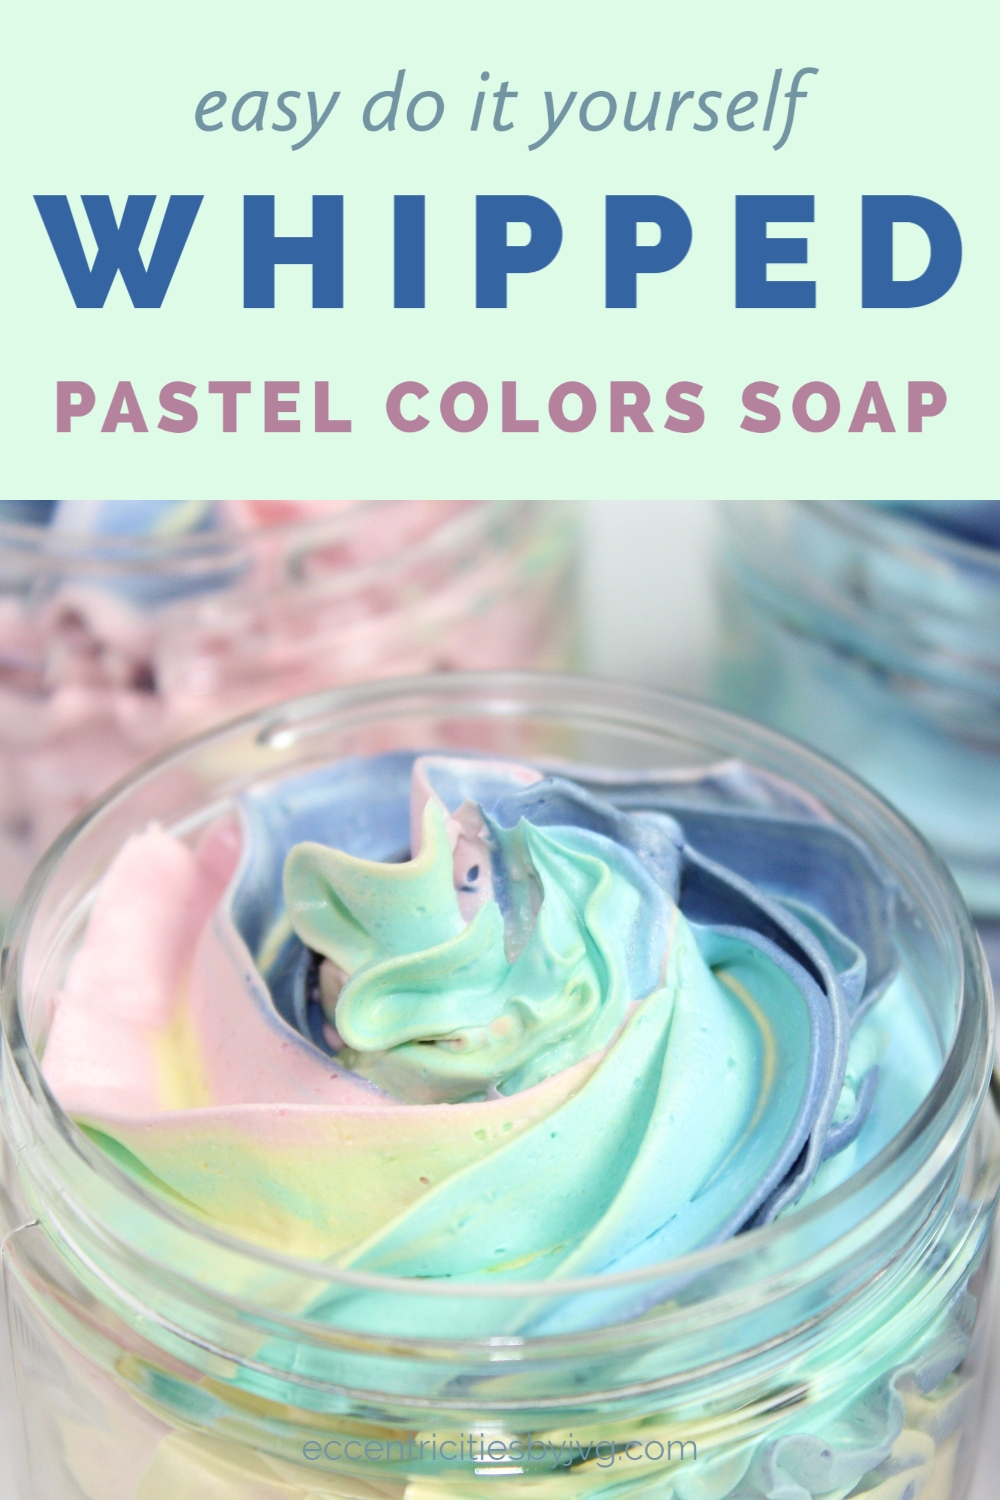 https://eccentricitiesbyjvg.com/wp-content/uploads/2020/08/pastel-colors-whipped-soap.jpg